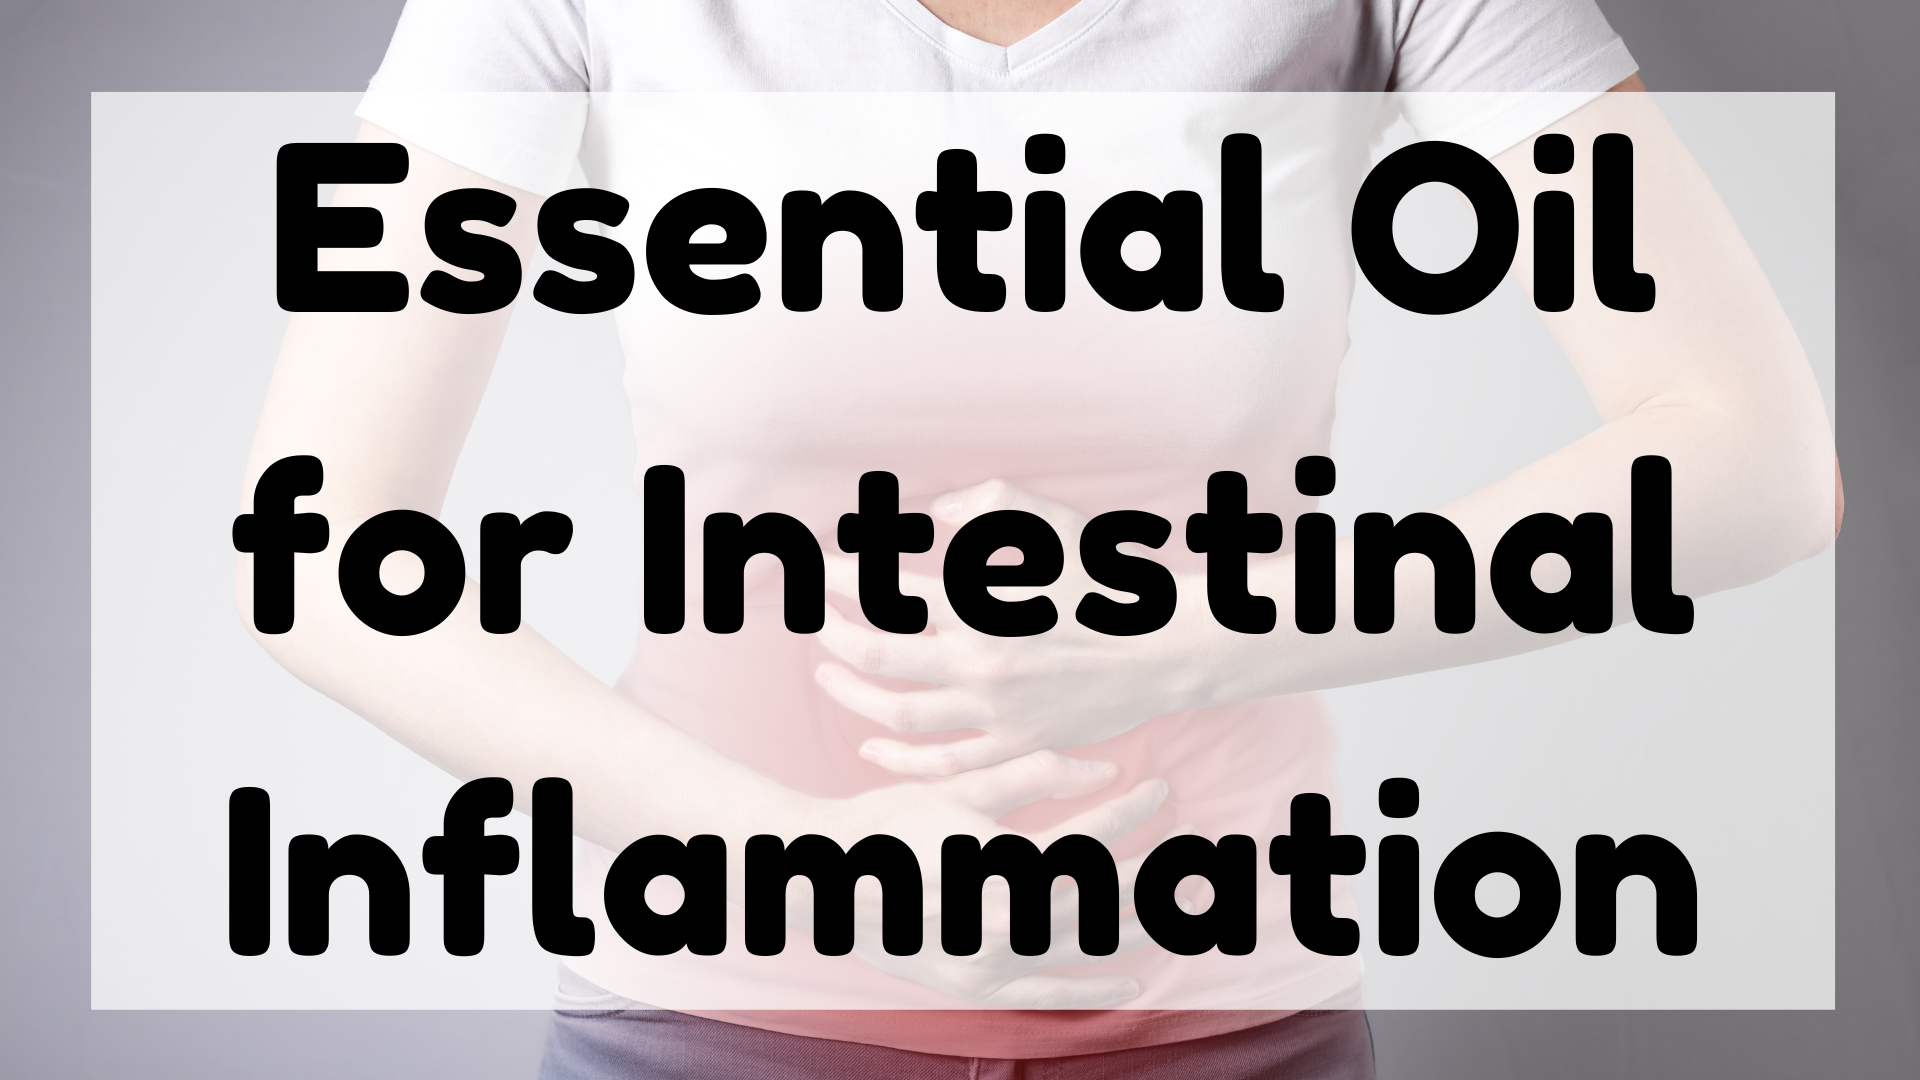 Essential Oil for Intestinal Inflammation featured image